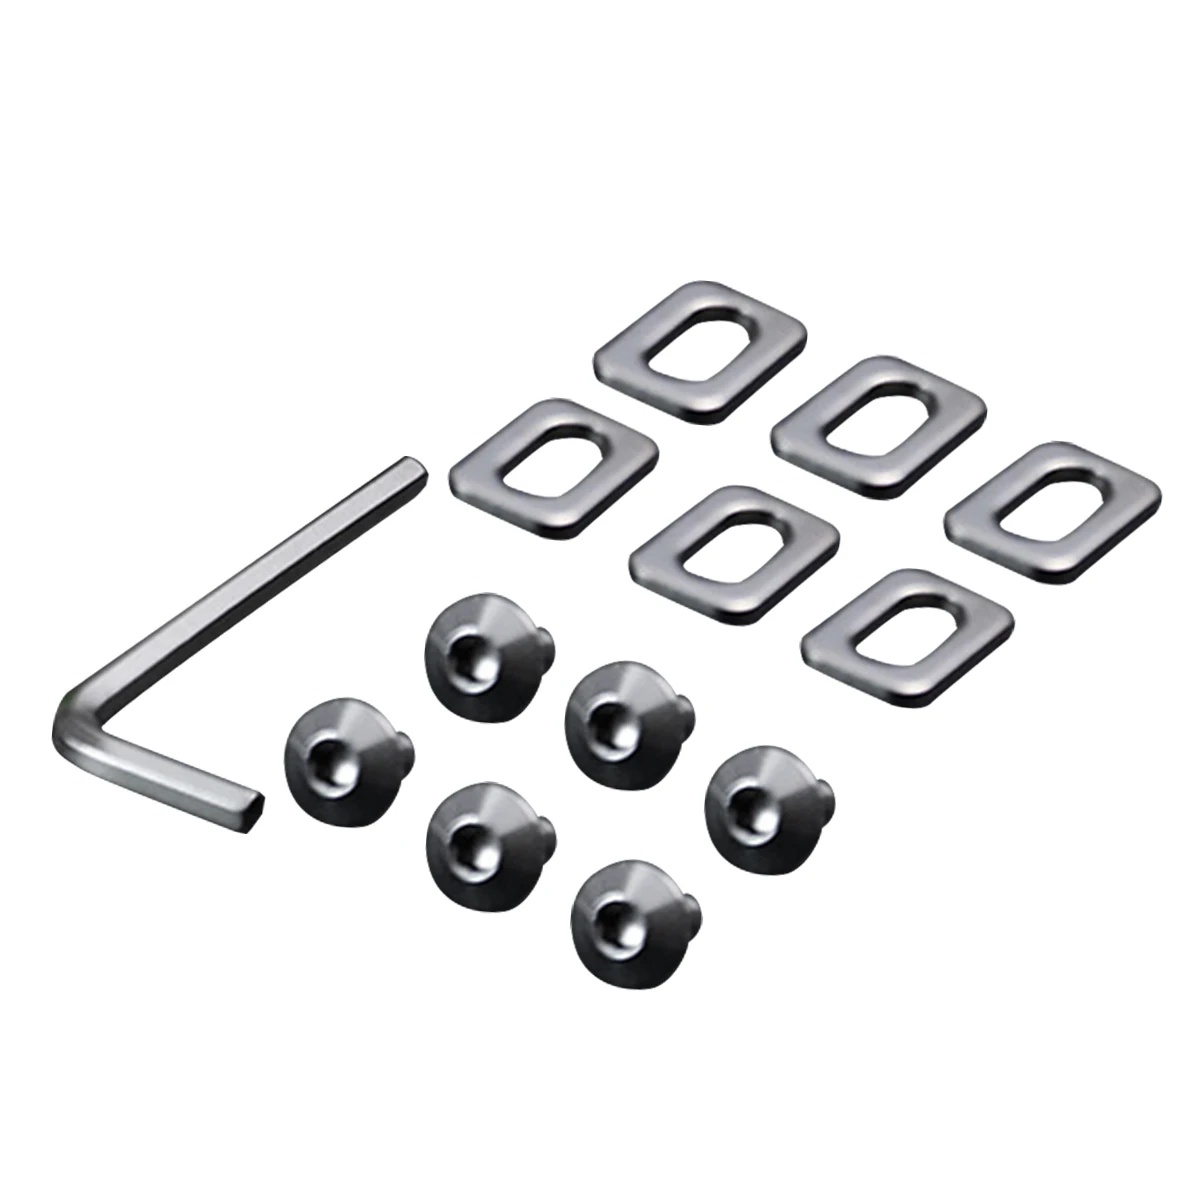 1 Set Road Bicycle Pedal Cleats Screw for Road Bike Pedals Cleats Self-locking Pedals Bolts  Screws Set Kit risk r8000 bike titanium screws bolts group set for bicycle derailleur system ultegra r8000 screw kit 49pcs ti bolts